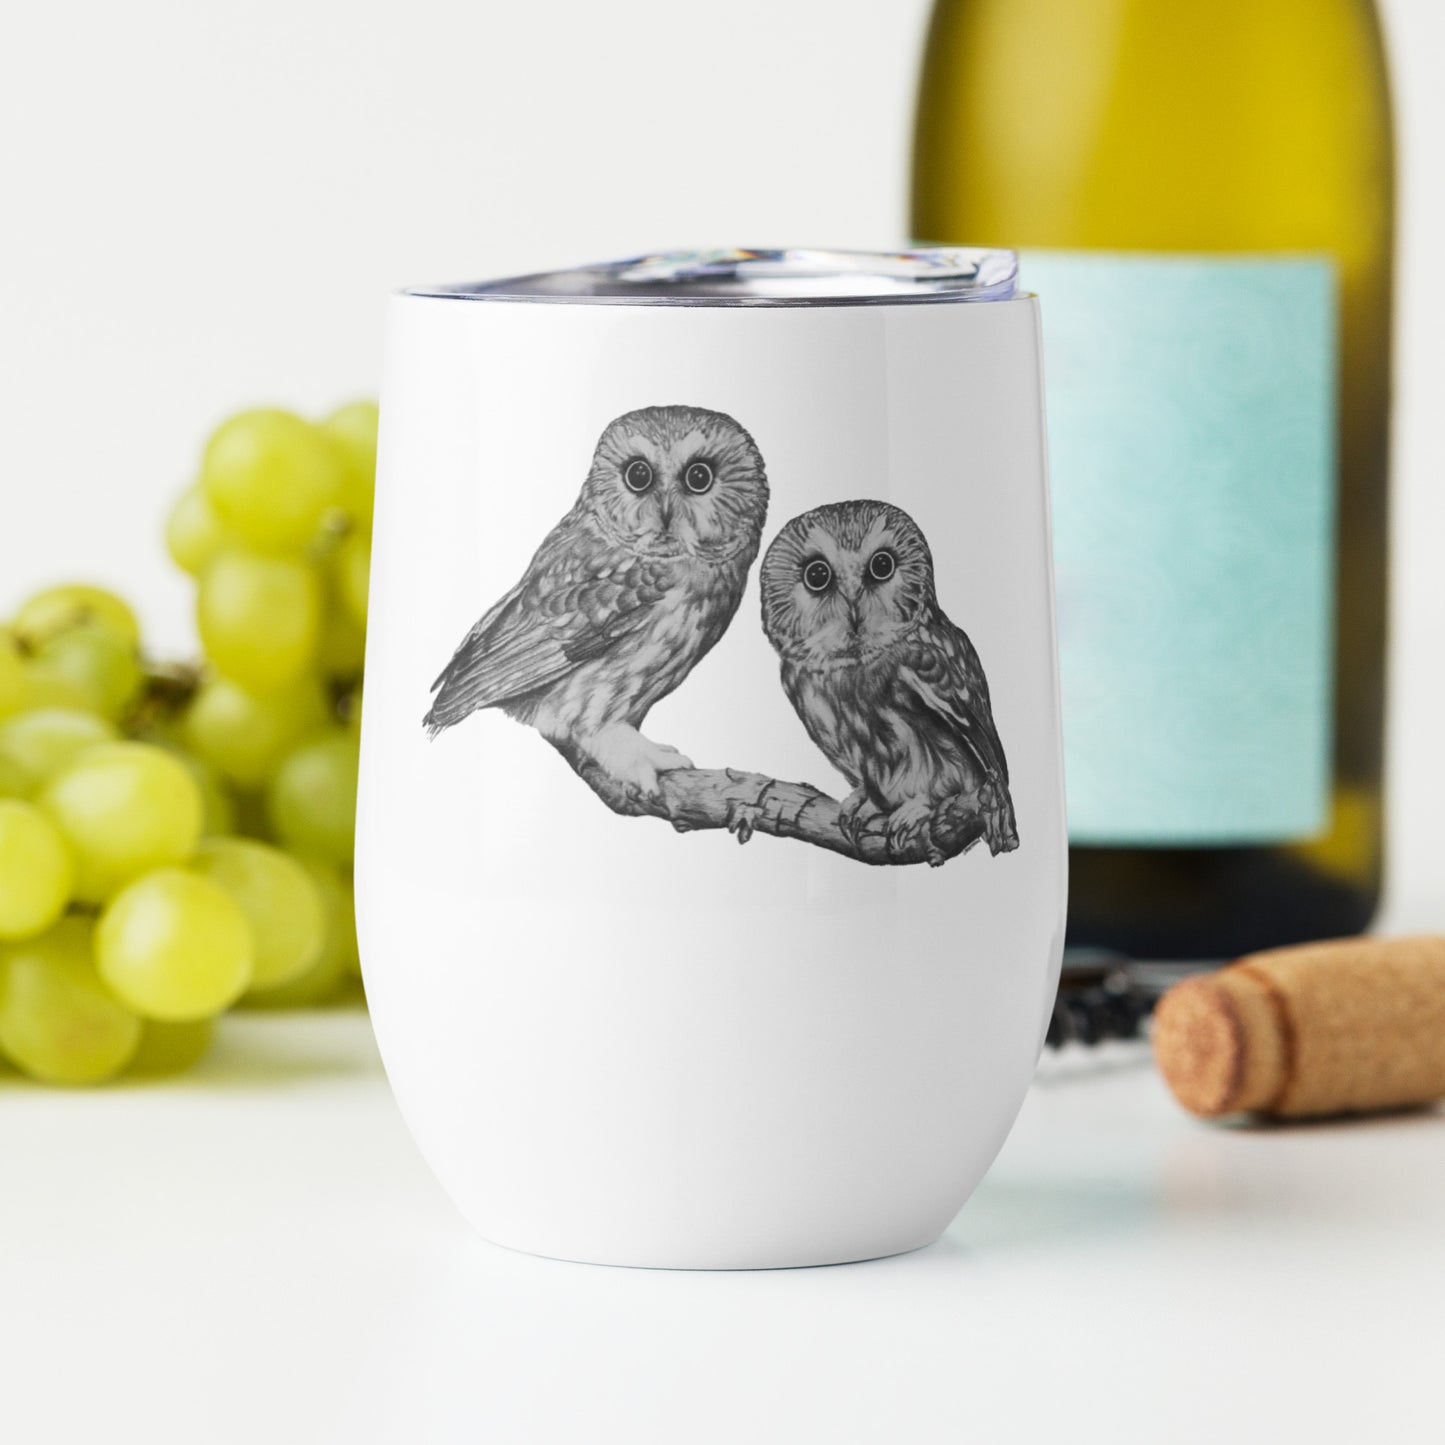 This "Owl Wine Tumbler (W)" is from a drawing of mine created with a graphite pencil. It has been digitally optimized and transferred to a 12oz White Wine Tumbler.